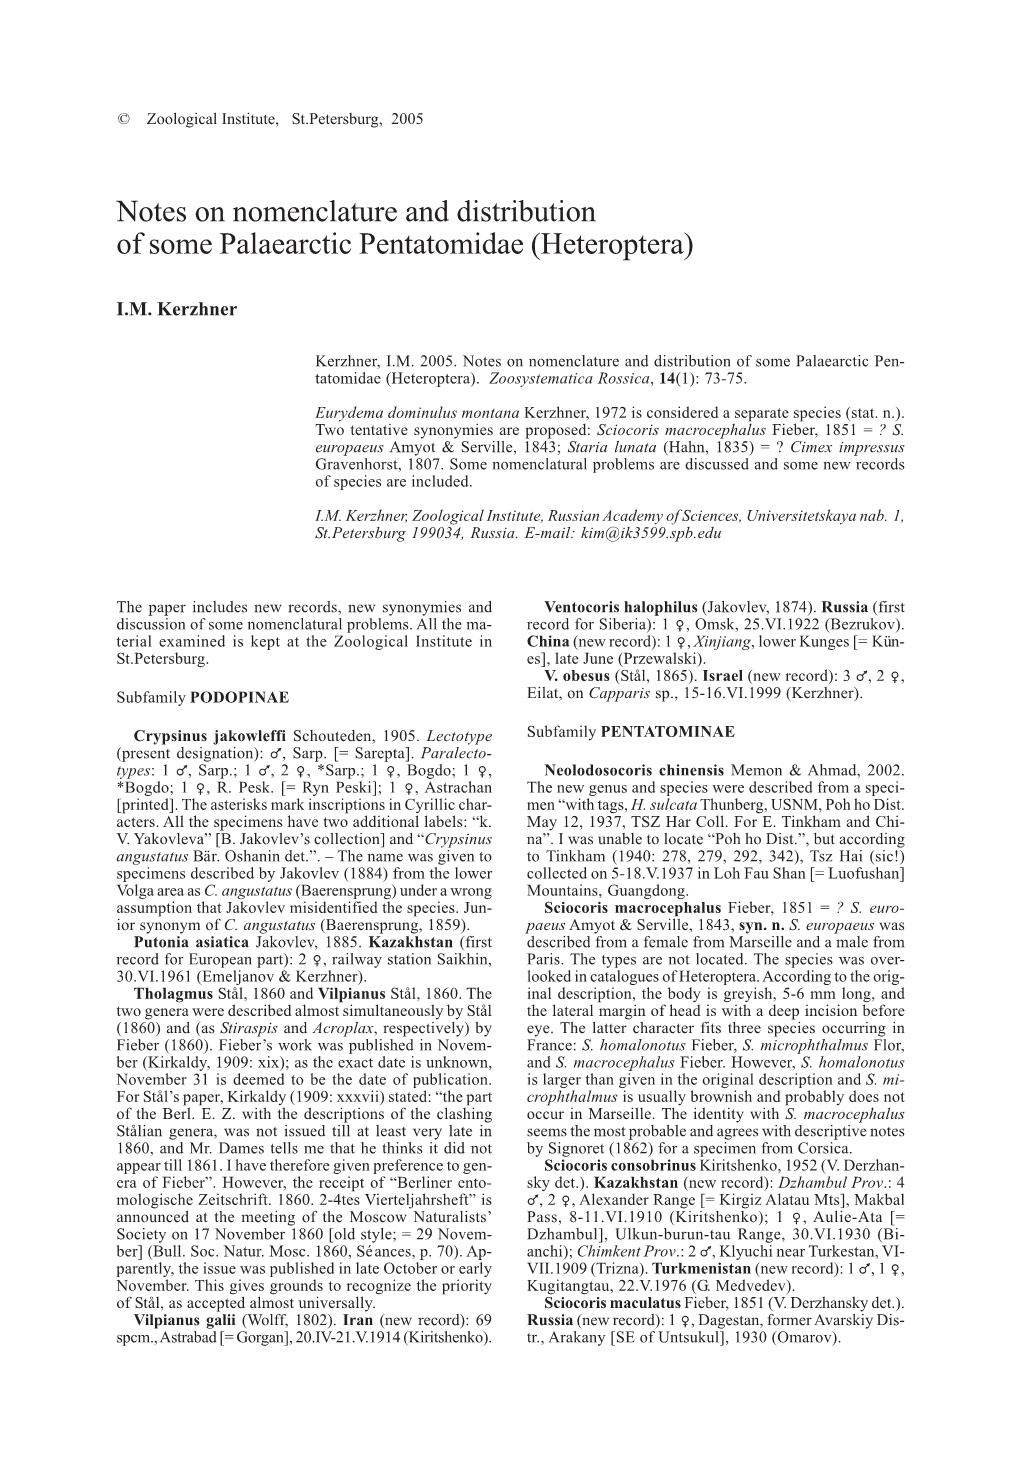 Notes on Nomenclature and Distribution of Some Palaearctic Pentatomidae (Heteroptera)